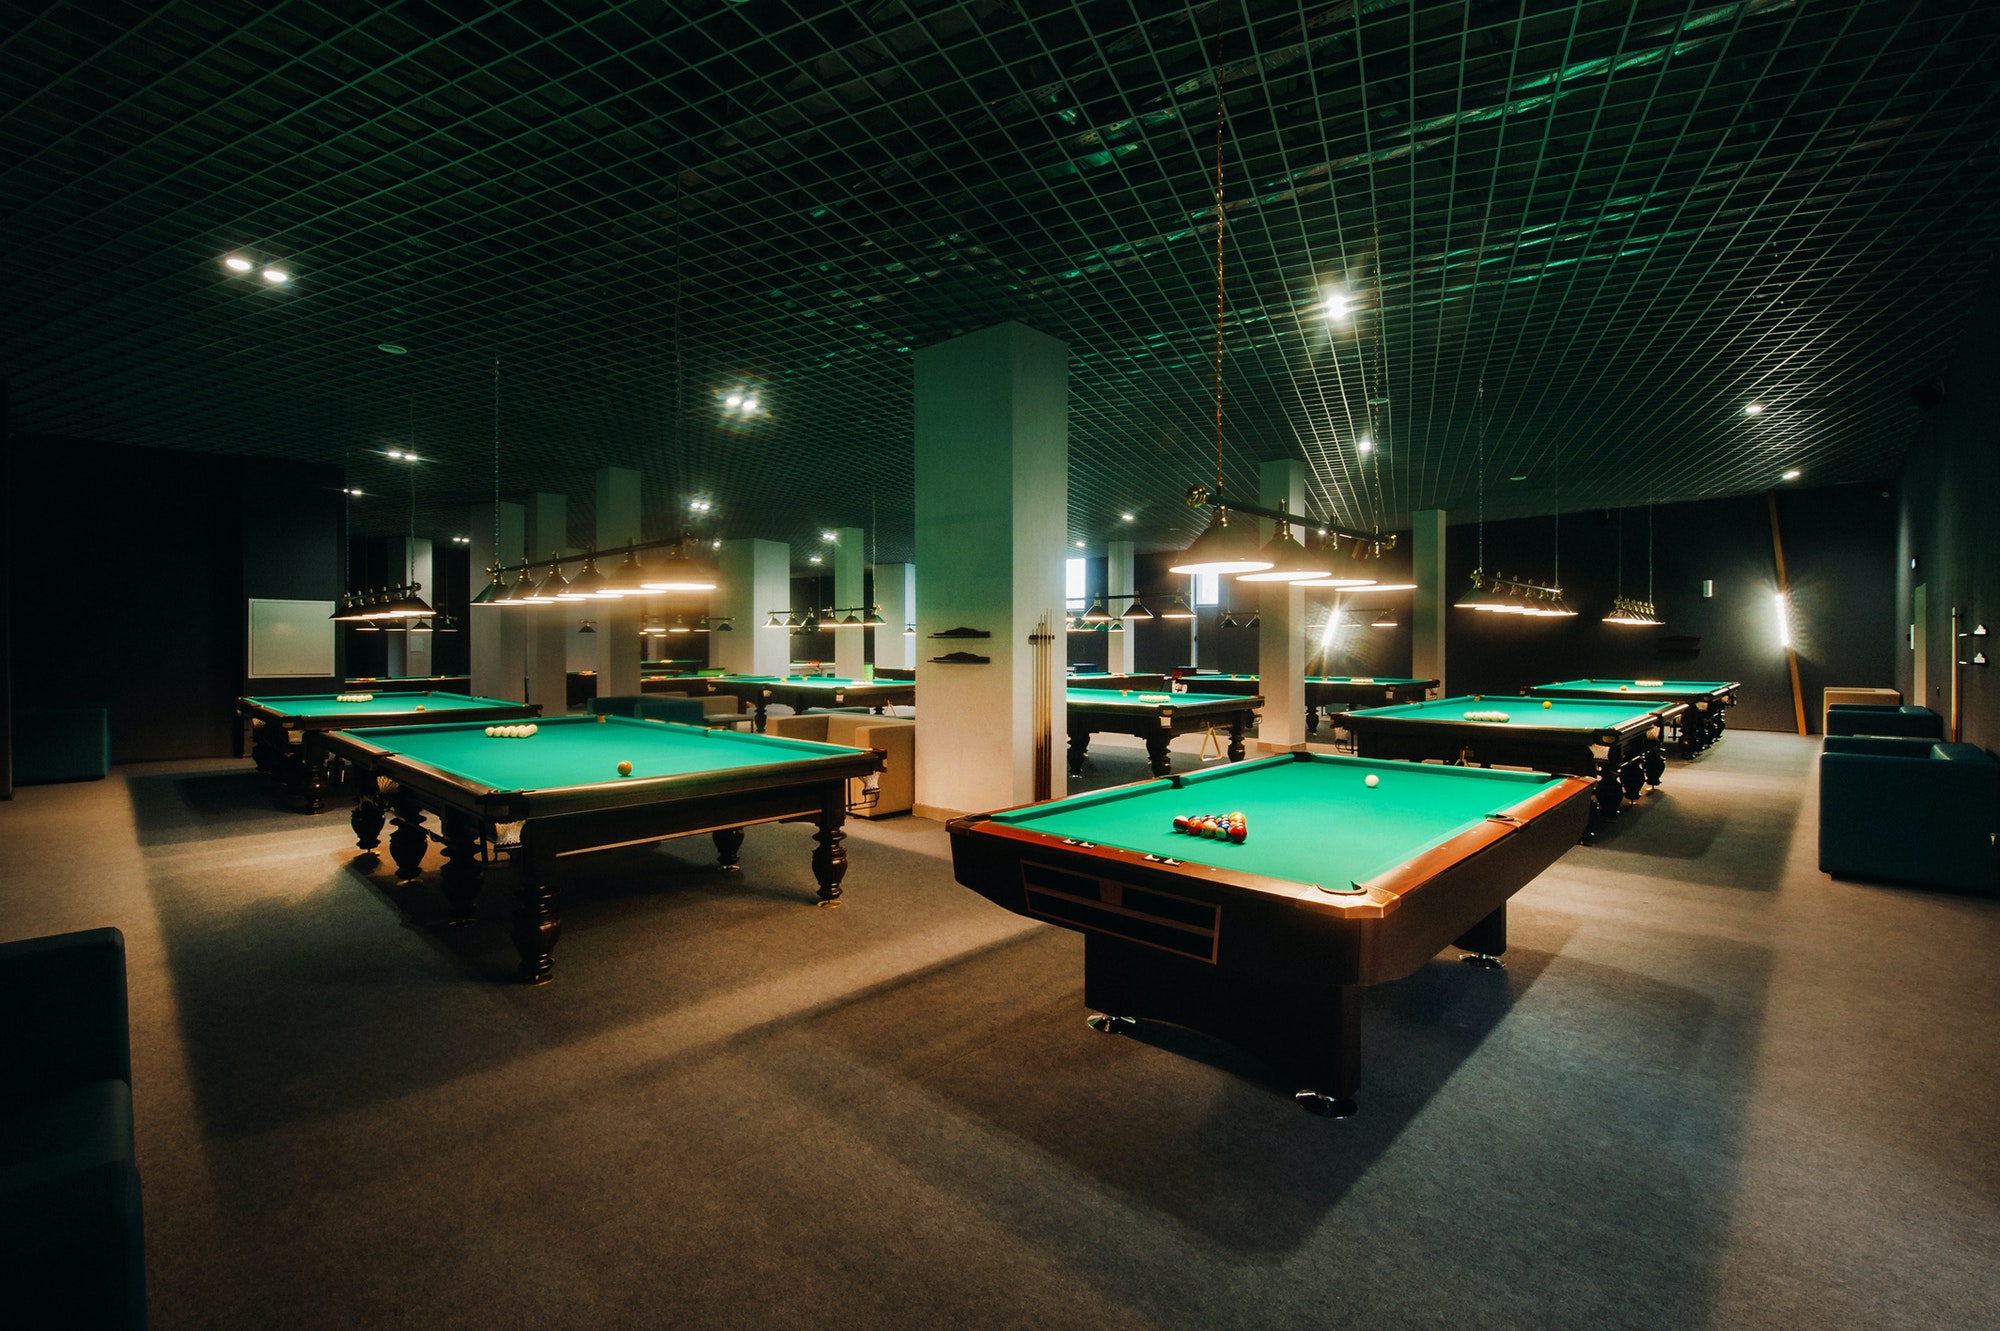 billiard-table-with-green-surface-and-balls-in-the-billiard-club-pool-game.jpg